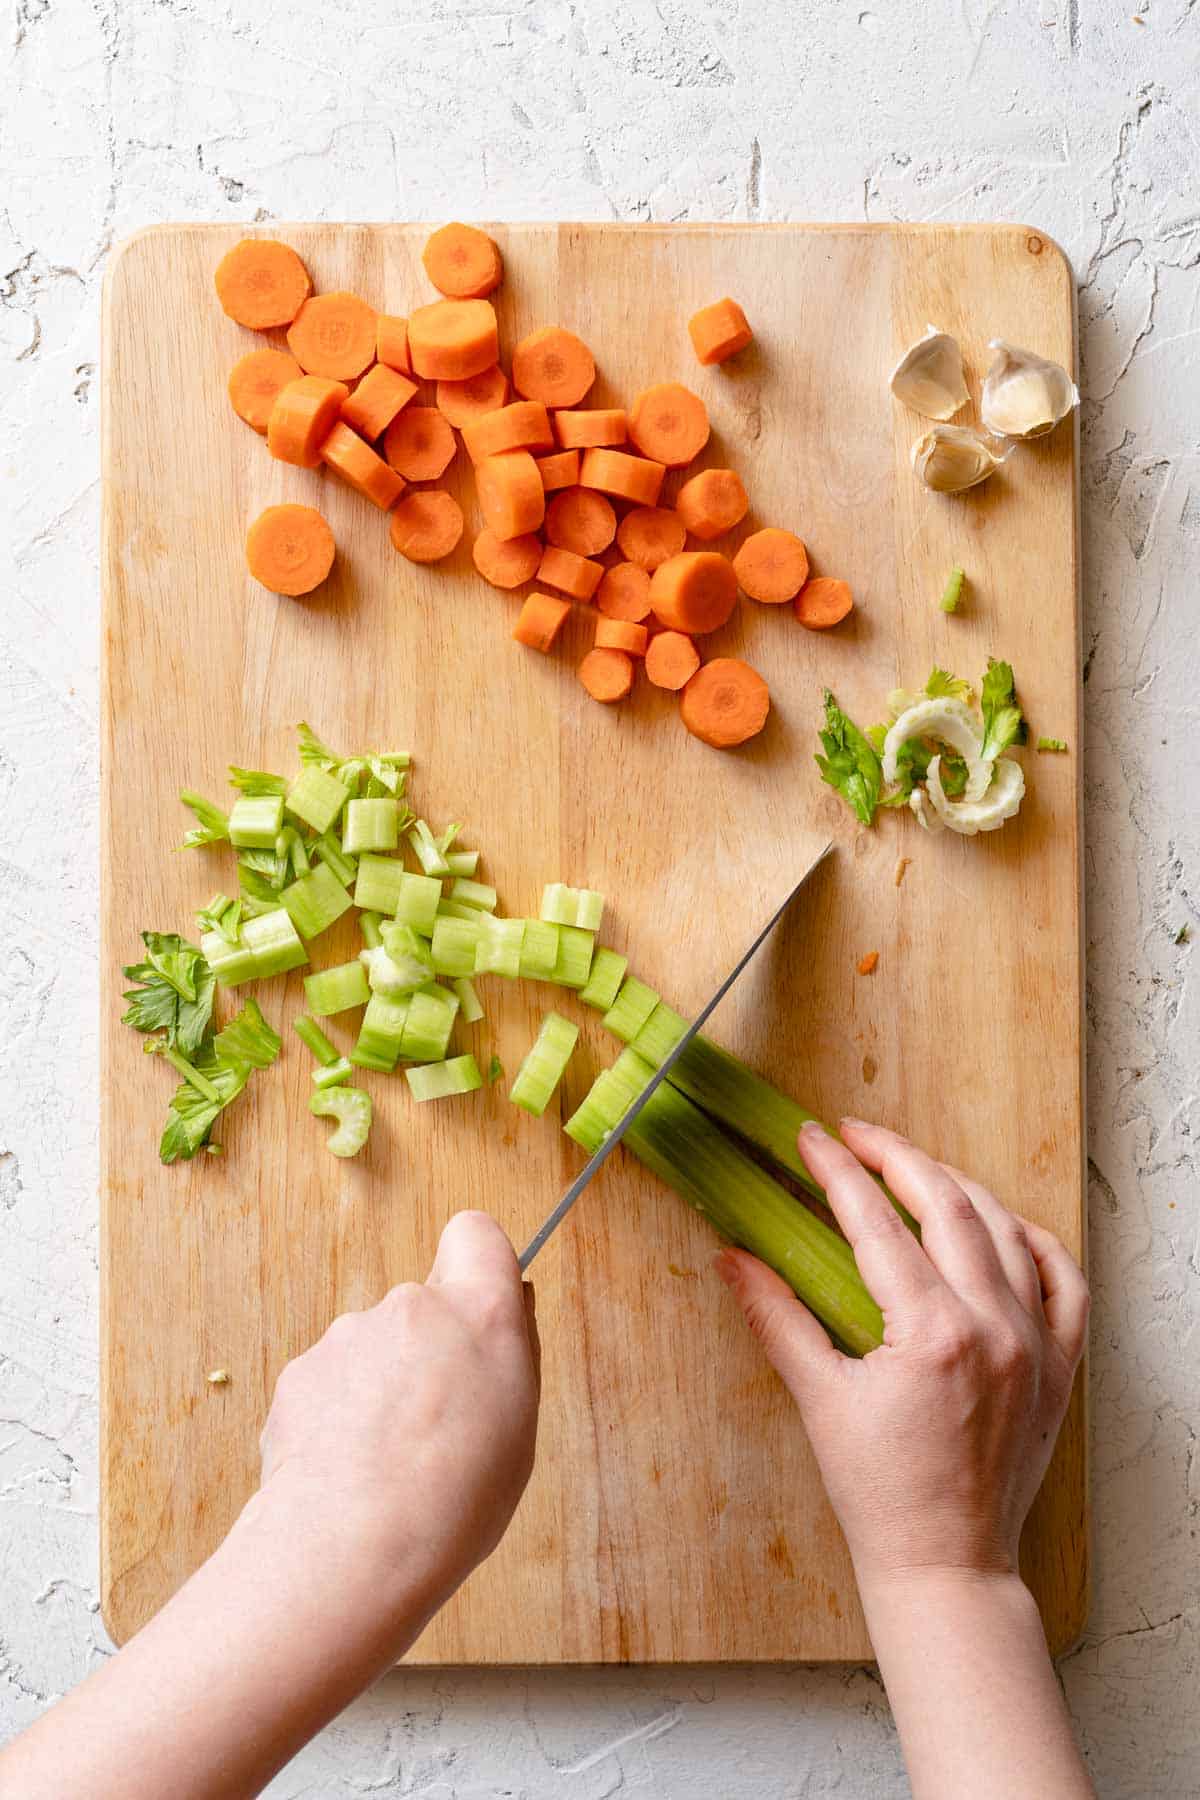 celery being sliced on cutting board